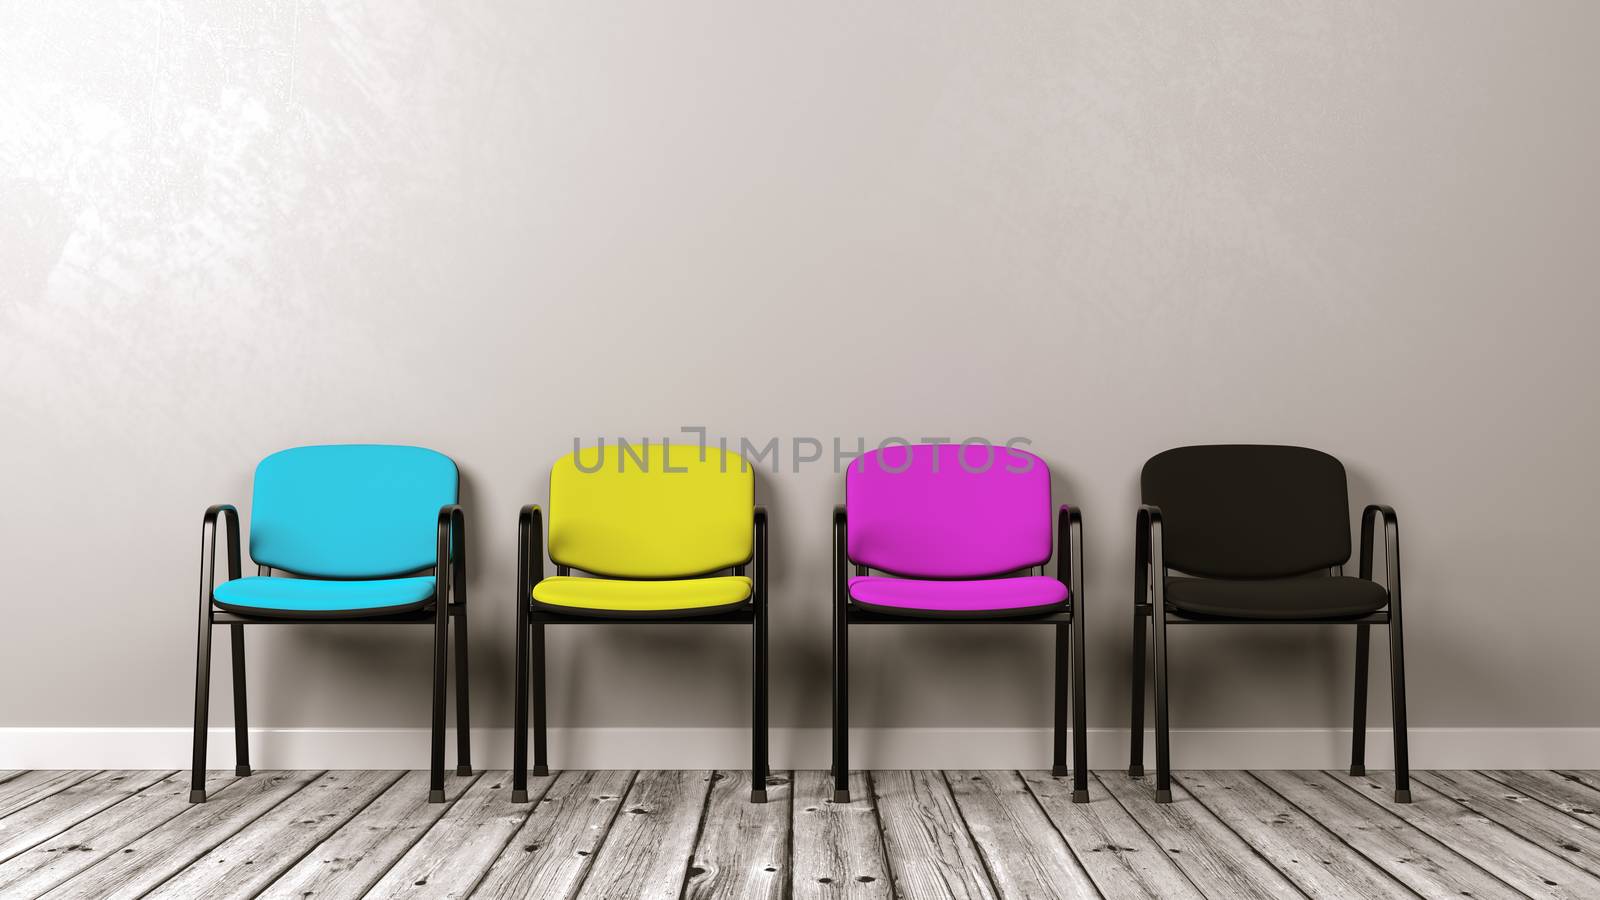 Four CMYK Colored Chairs on Wooden Floor Against Grey Wall with Copyspace 3D Illustration